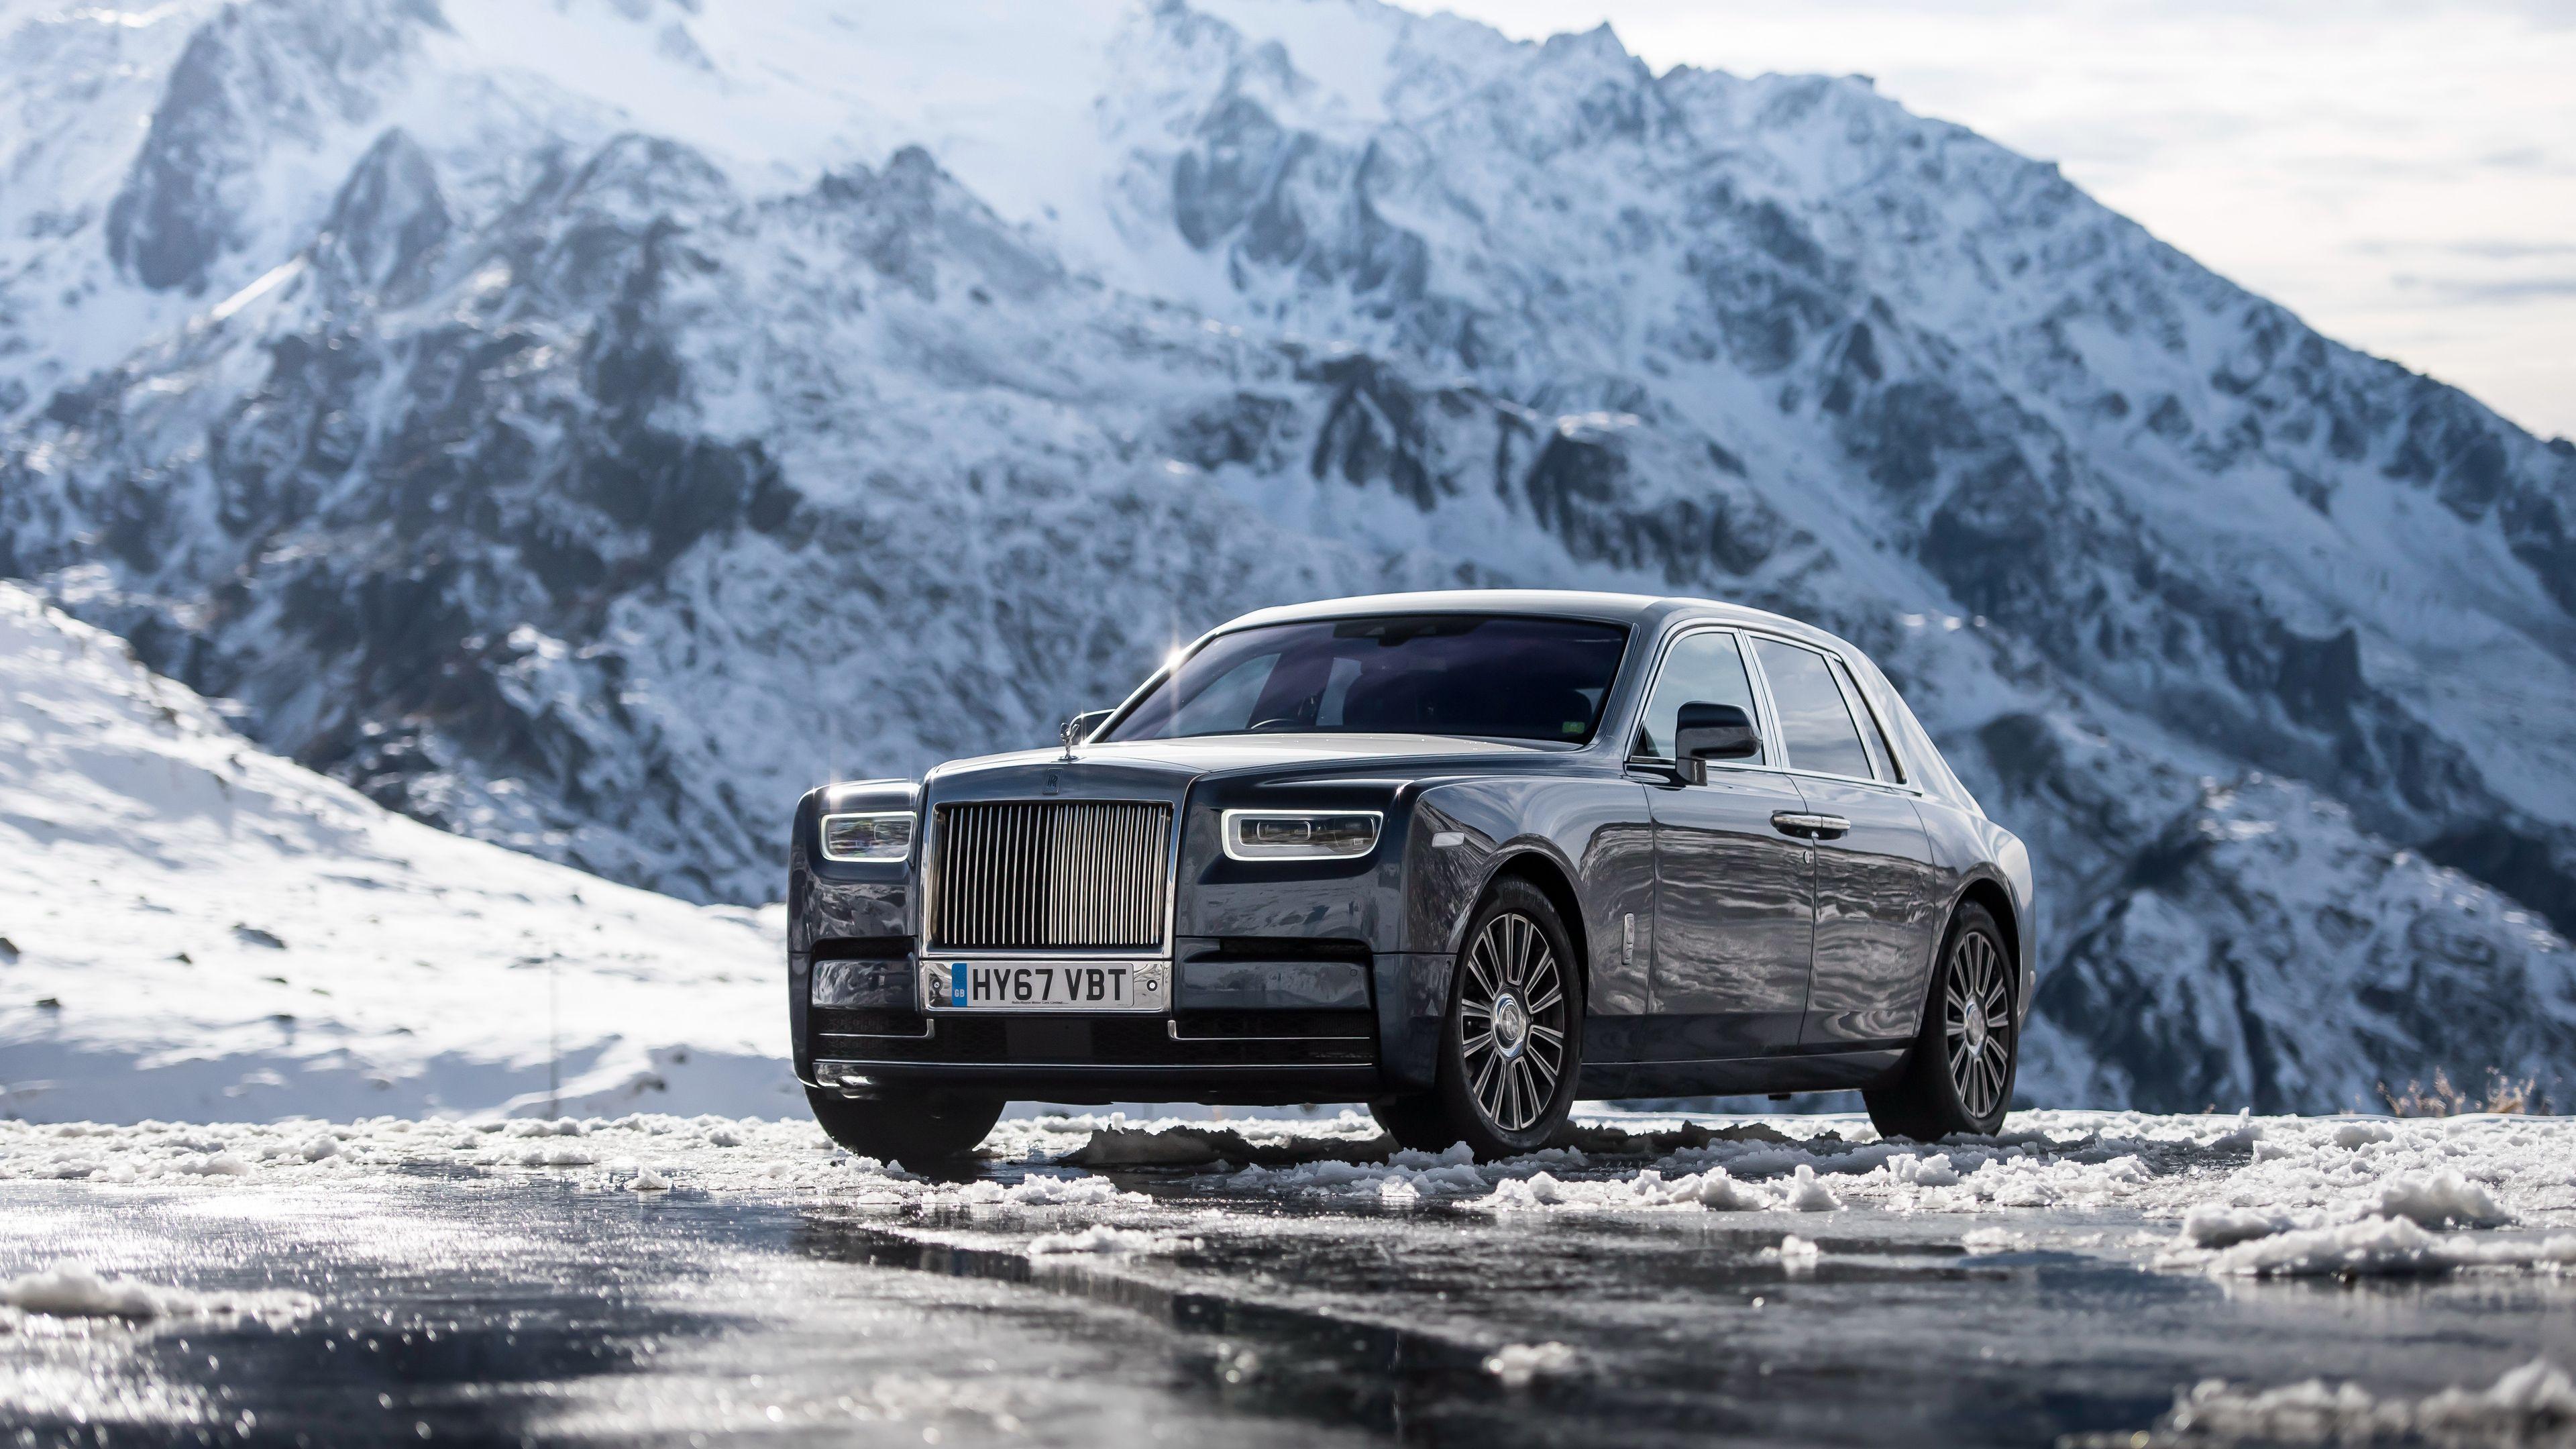 Rolls-Royce Wraith Wallpapers - Wallpaper Cave